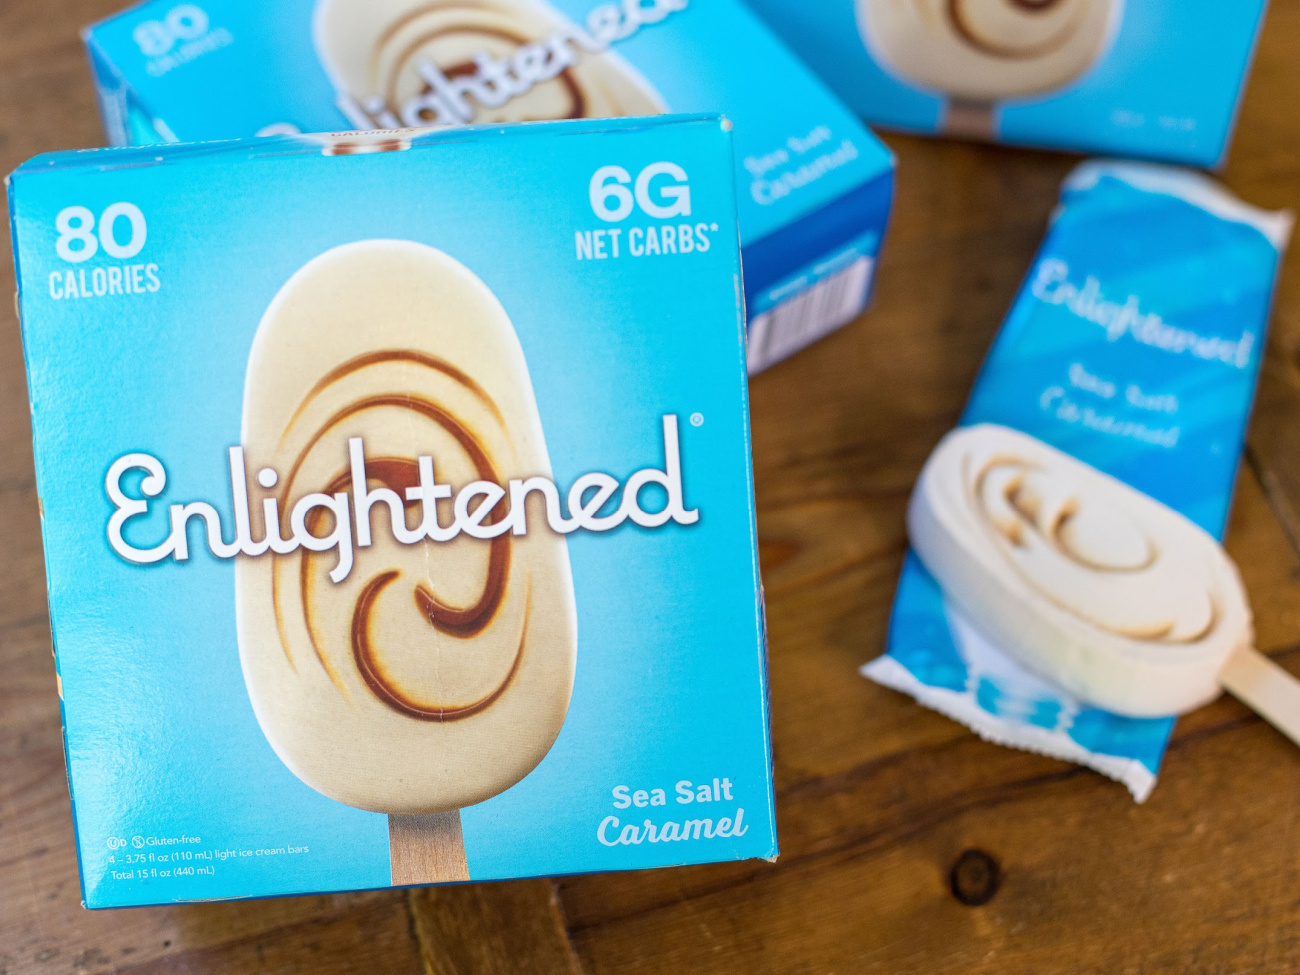 Enlightened Ice Cream As Low As $2.40 At Publix (Regular Price $5.79)